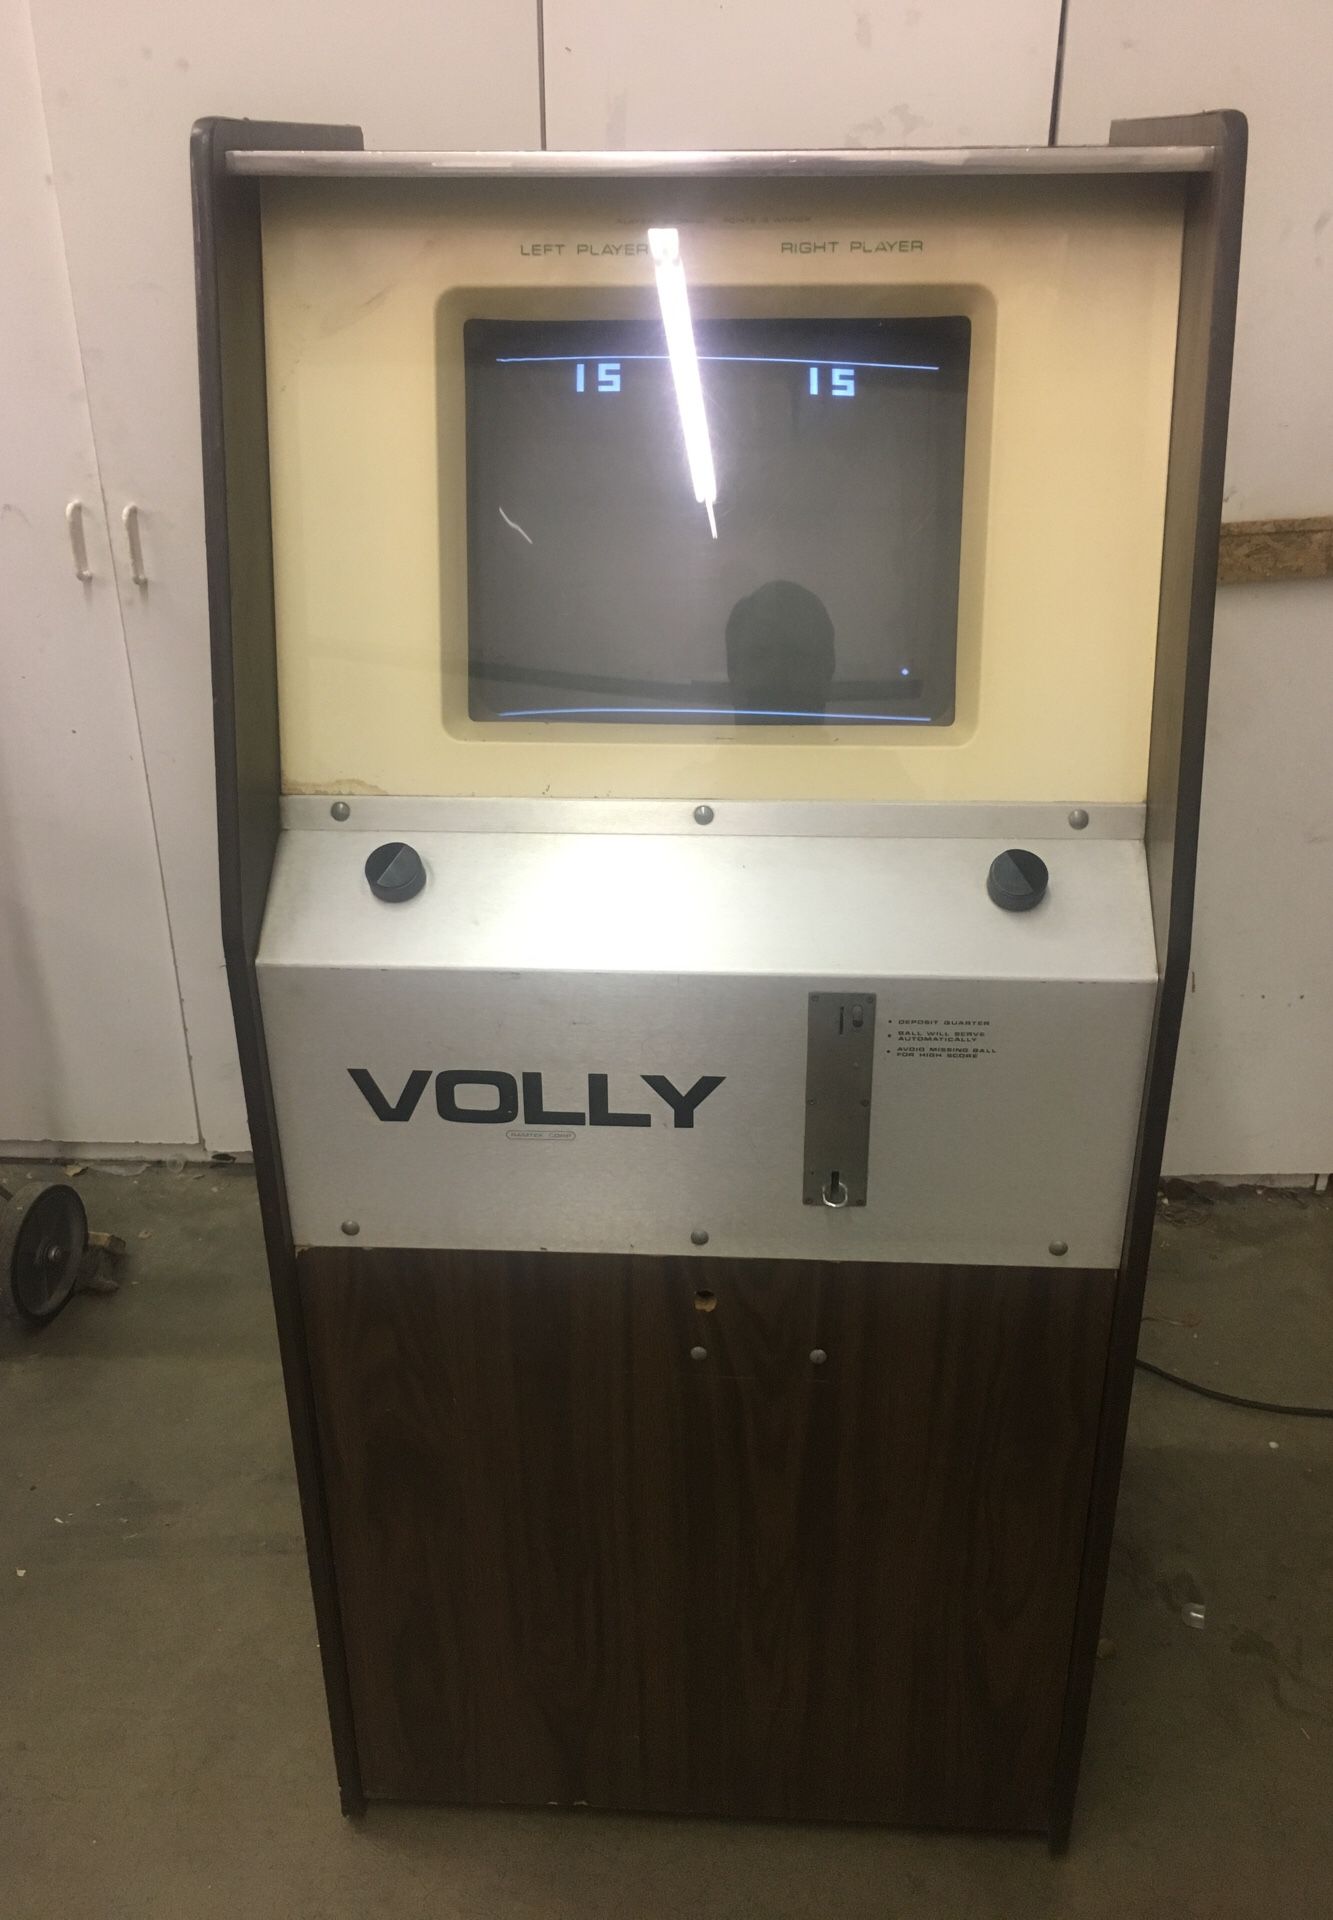 Volly video arcade game